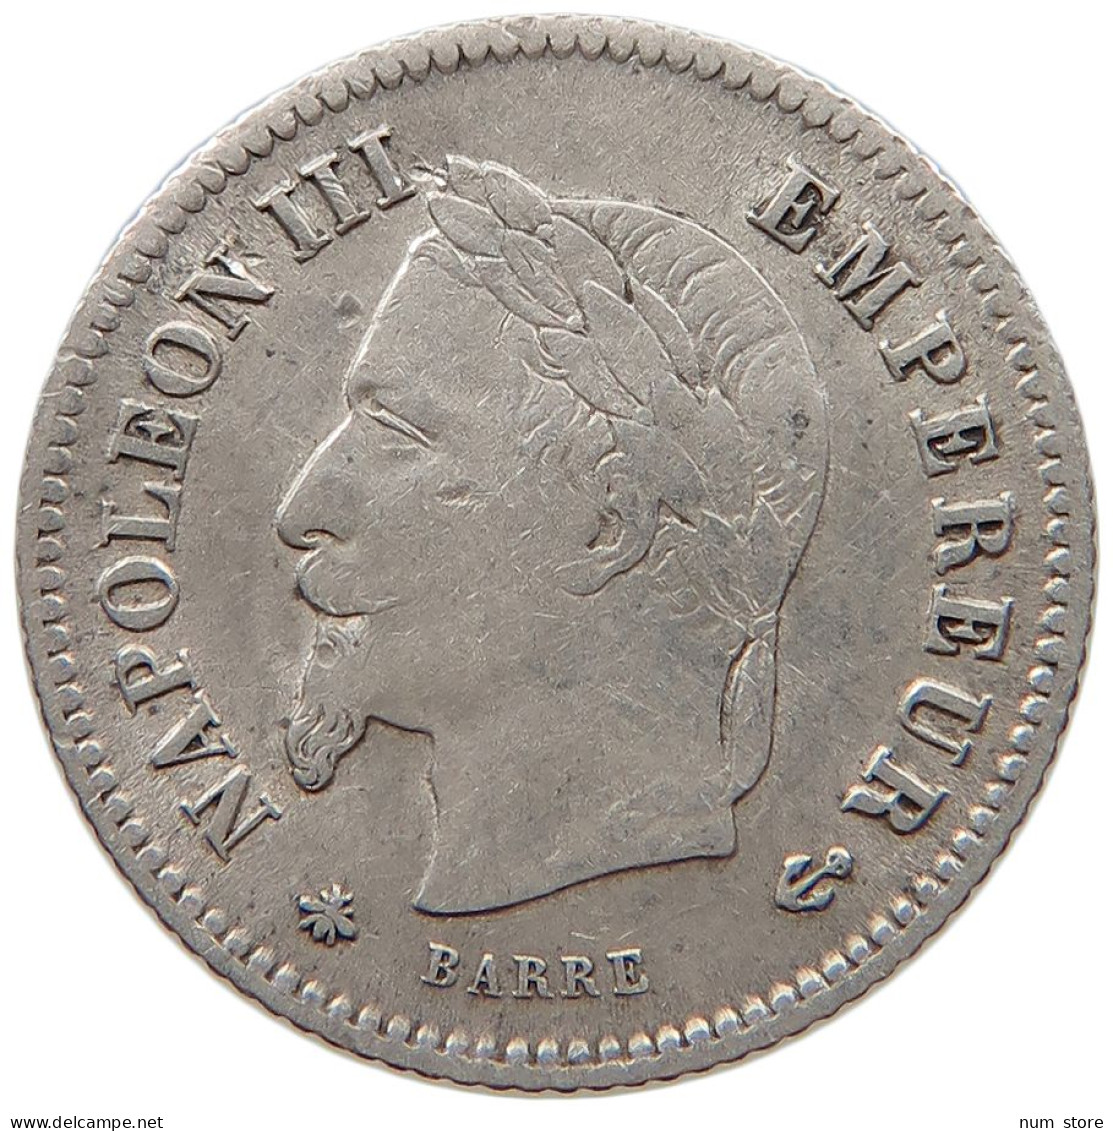 FRANCE 20 CENTIMES 1867 A Napoleon III. (1852-1870) #s012 0025 - 20 Centimes